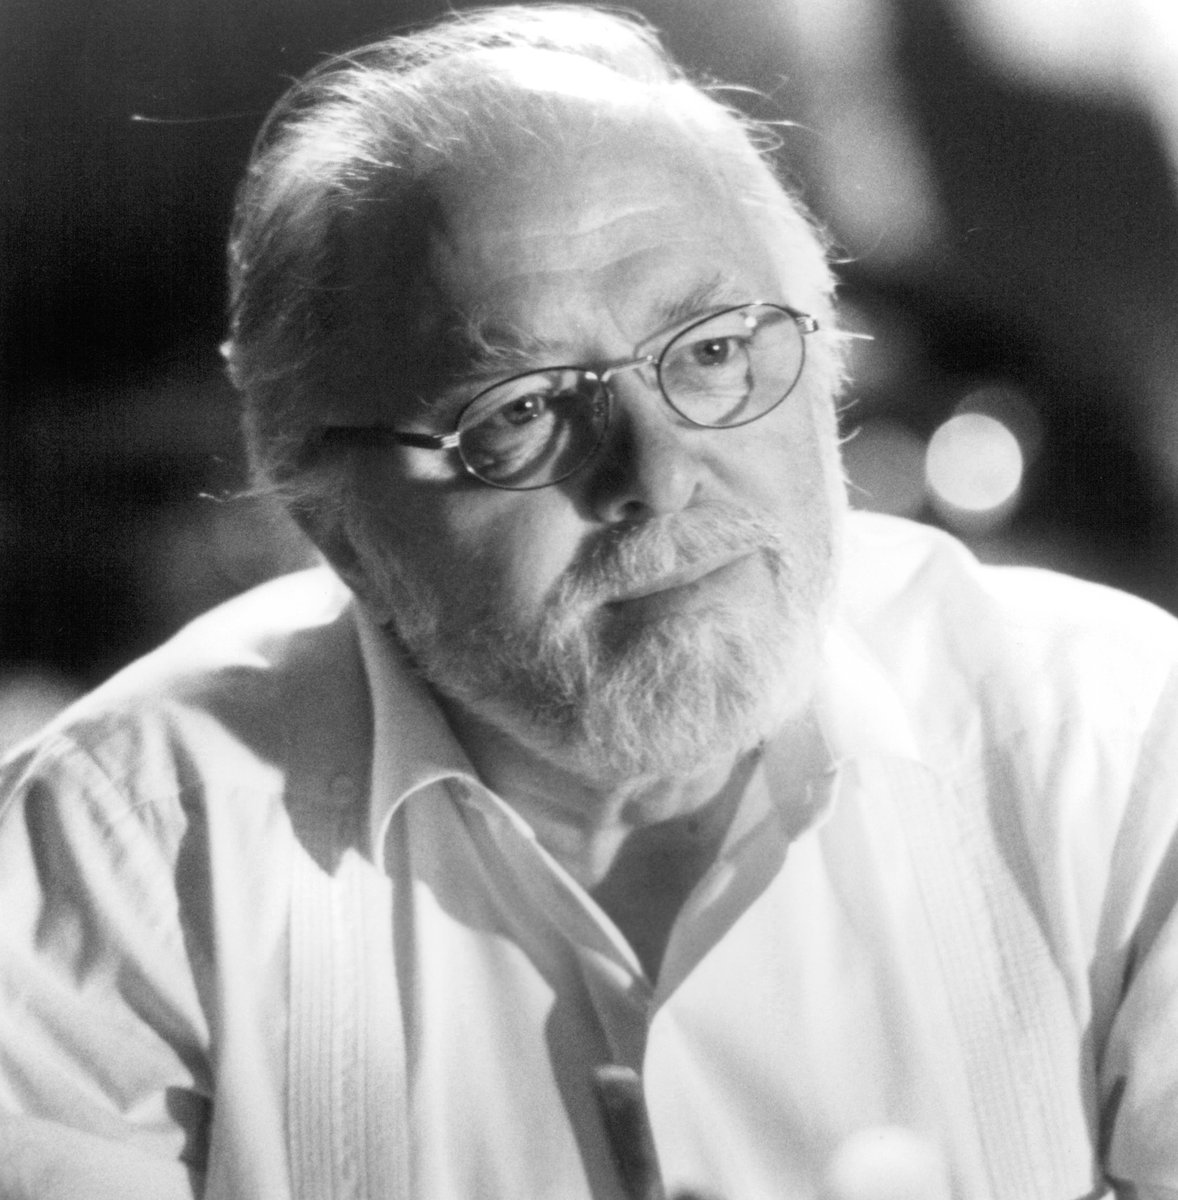 First movie or series you think of when you see Richard Attenborough? (1923-2014)

#RichardAttenborough